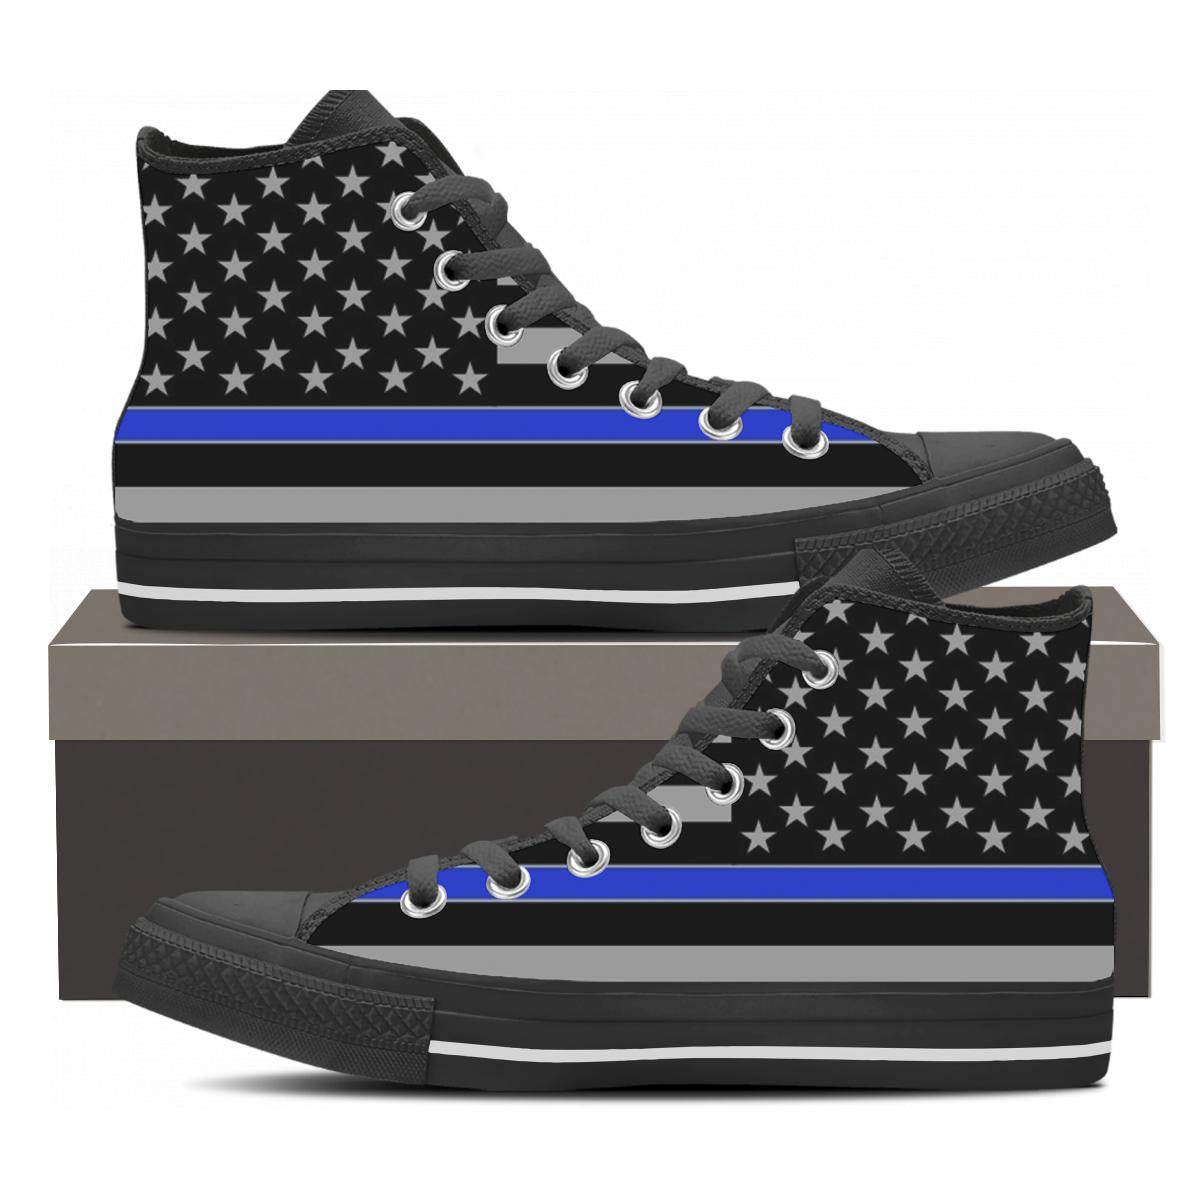 Thin Blue Line High Tops - Cool Tees and Things